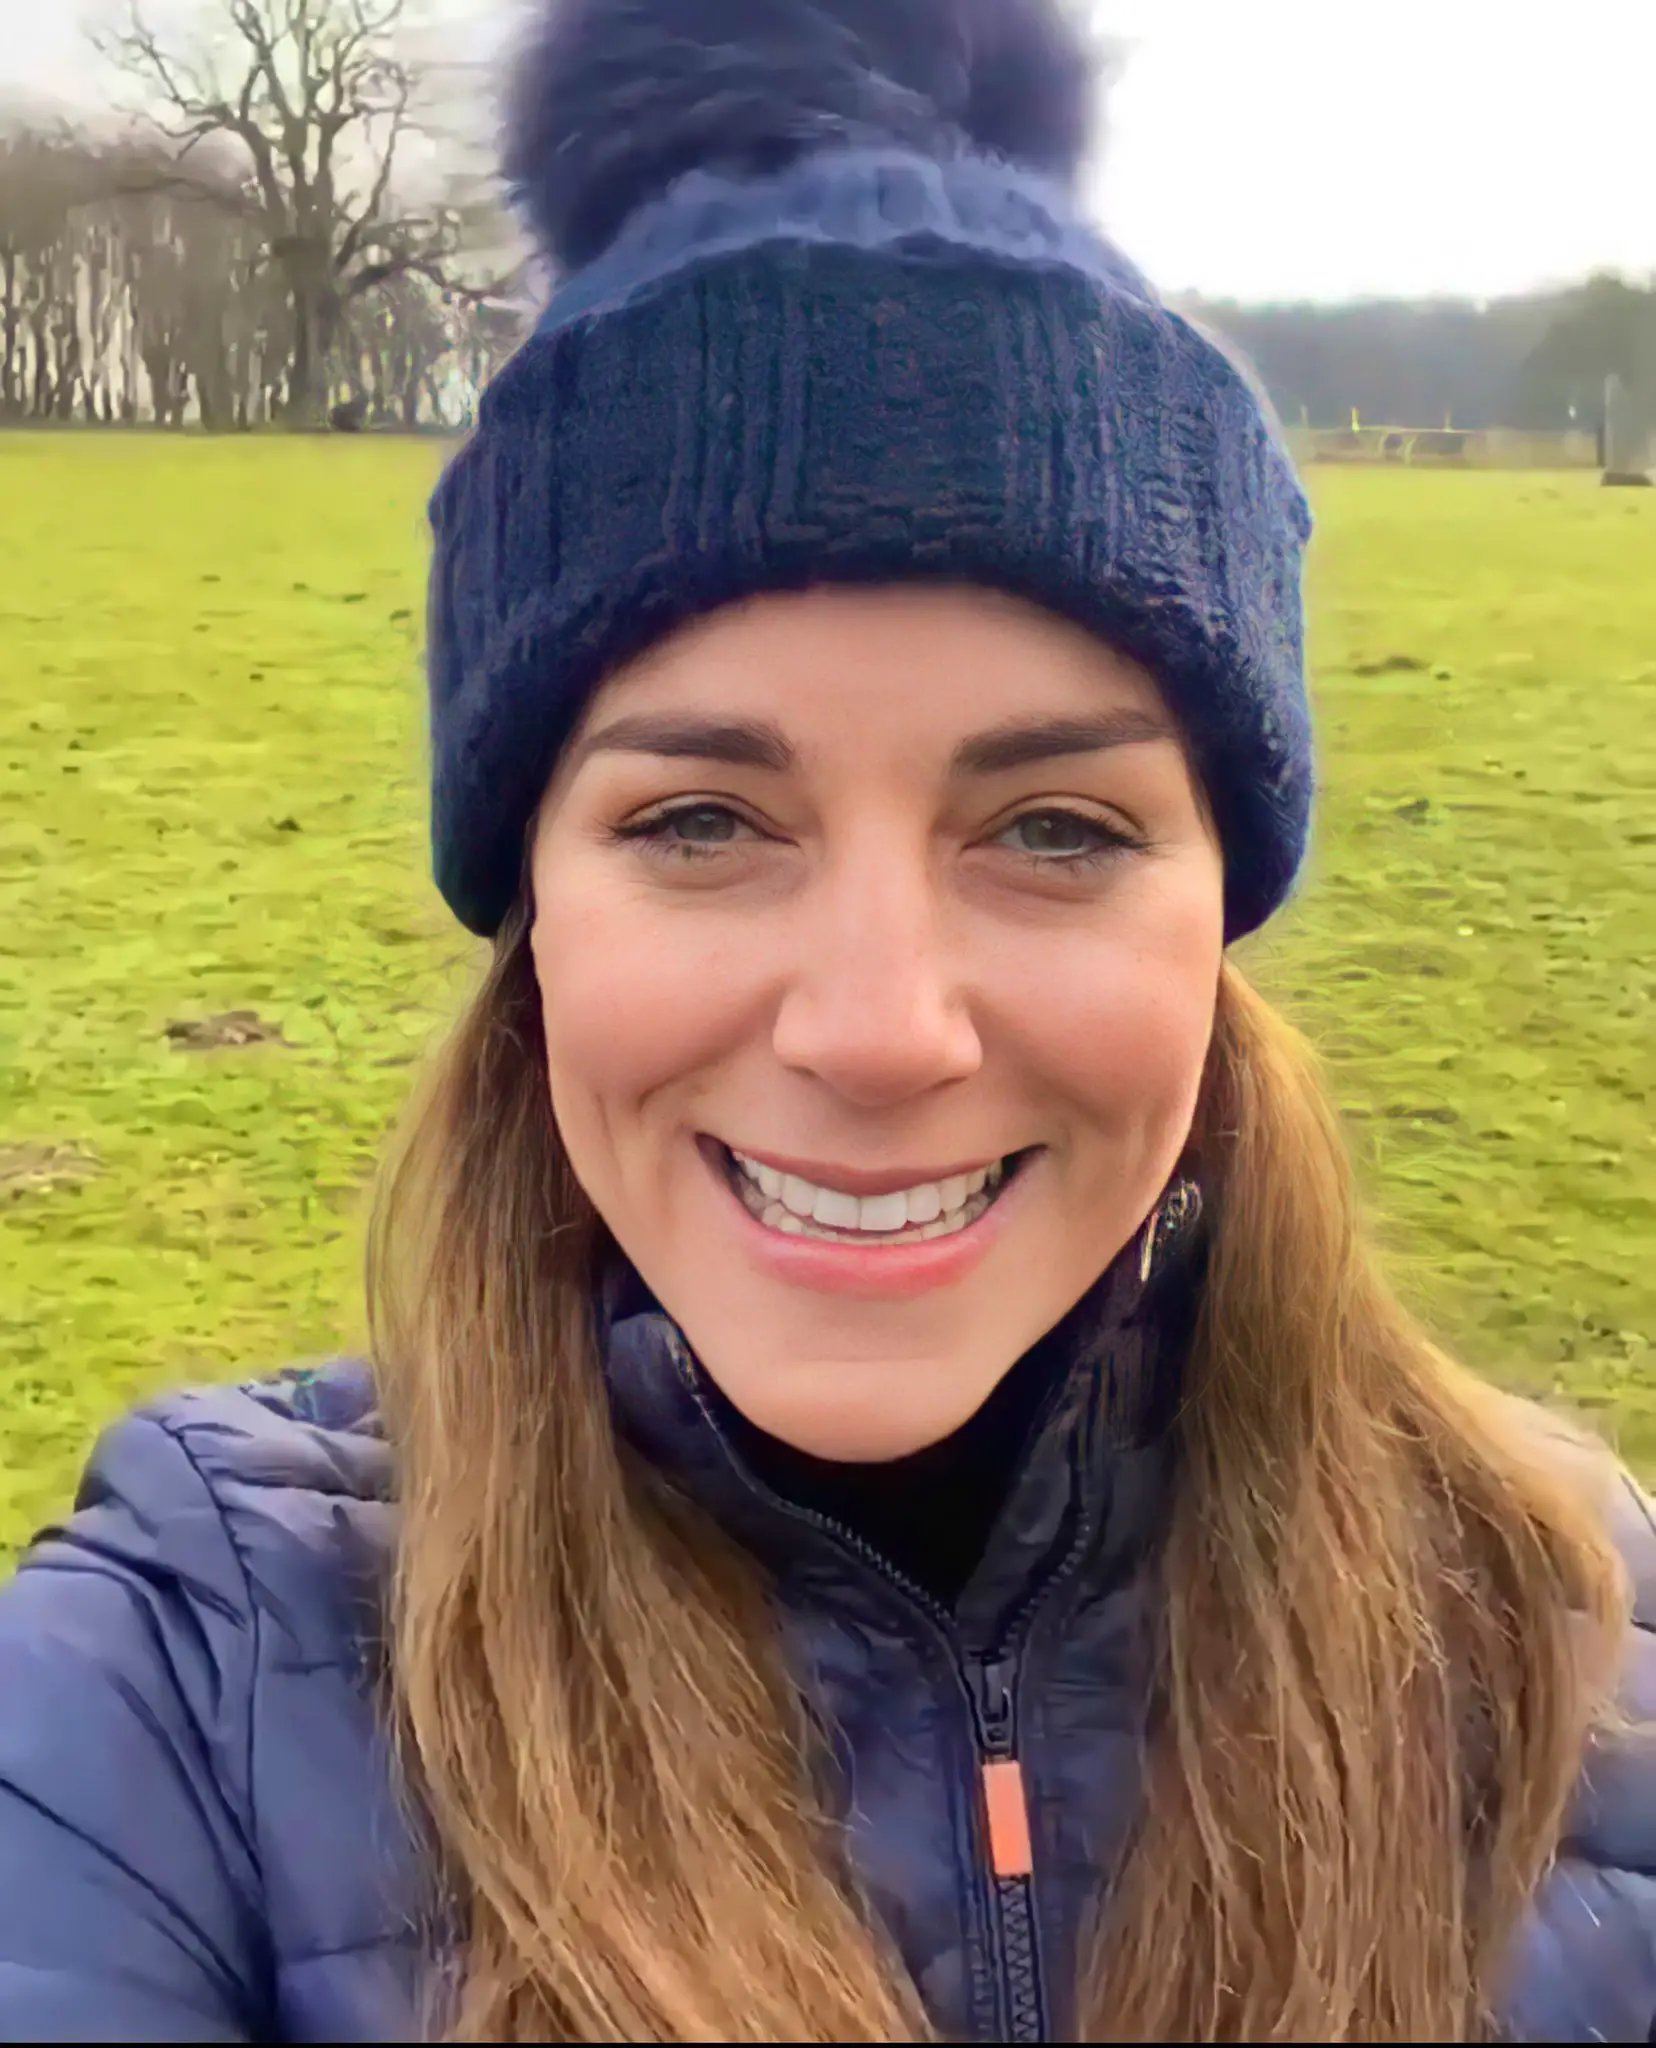 The Duchess of Cambridge donned a bobble hat to record her first selfie video